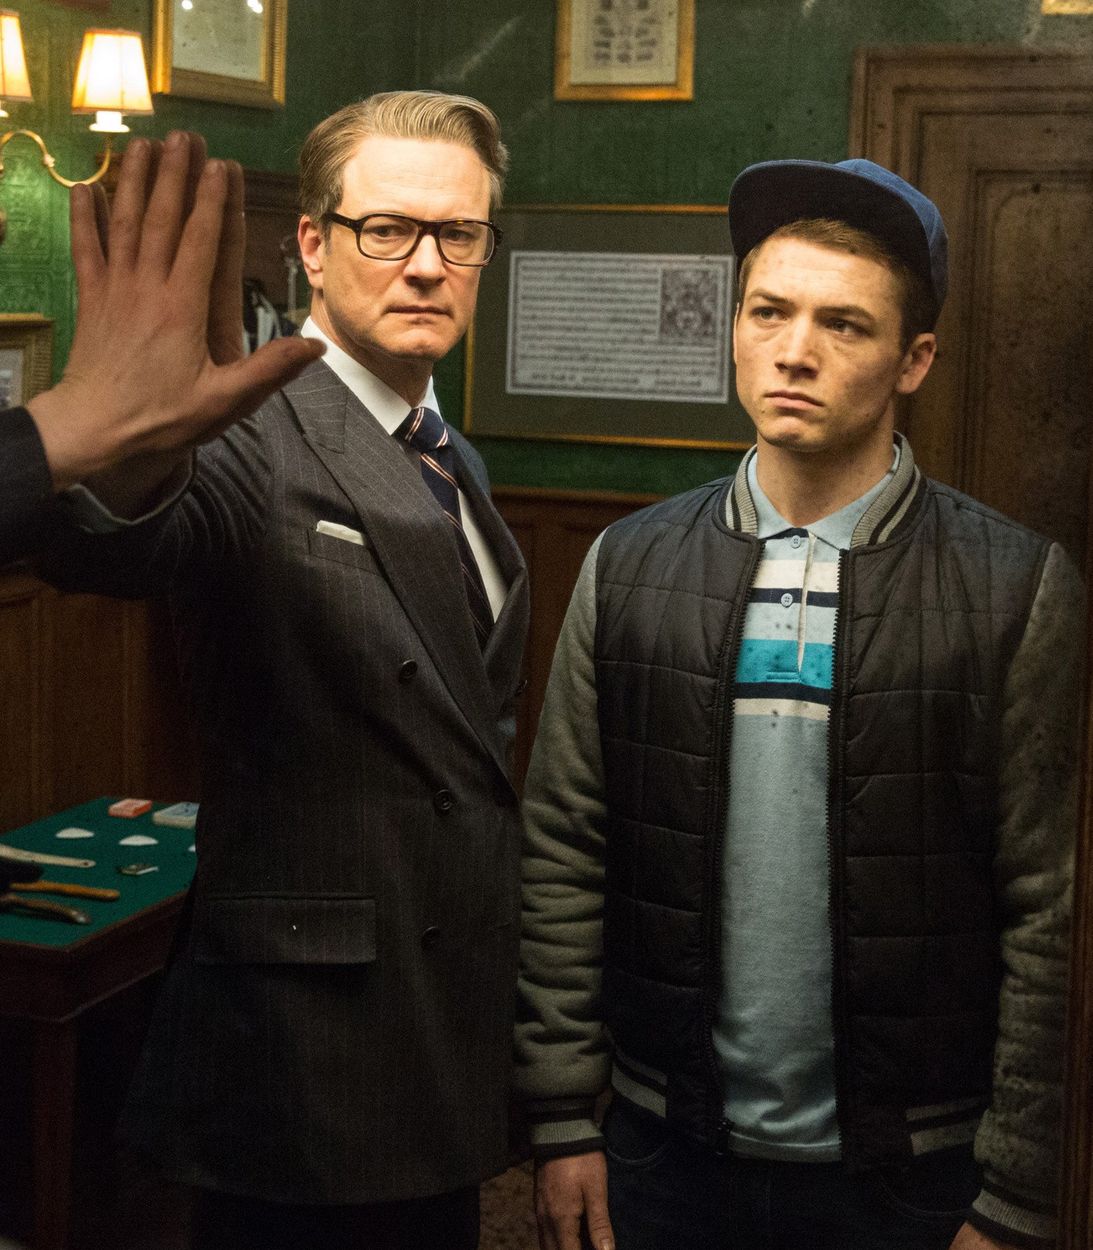 Colin Firth and Taron Egerton in Kingsman vertical